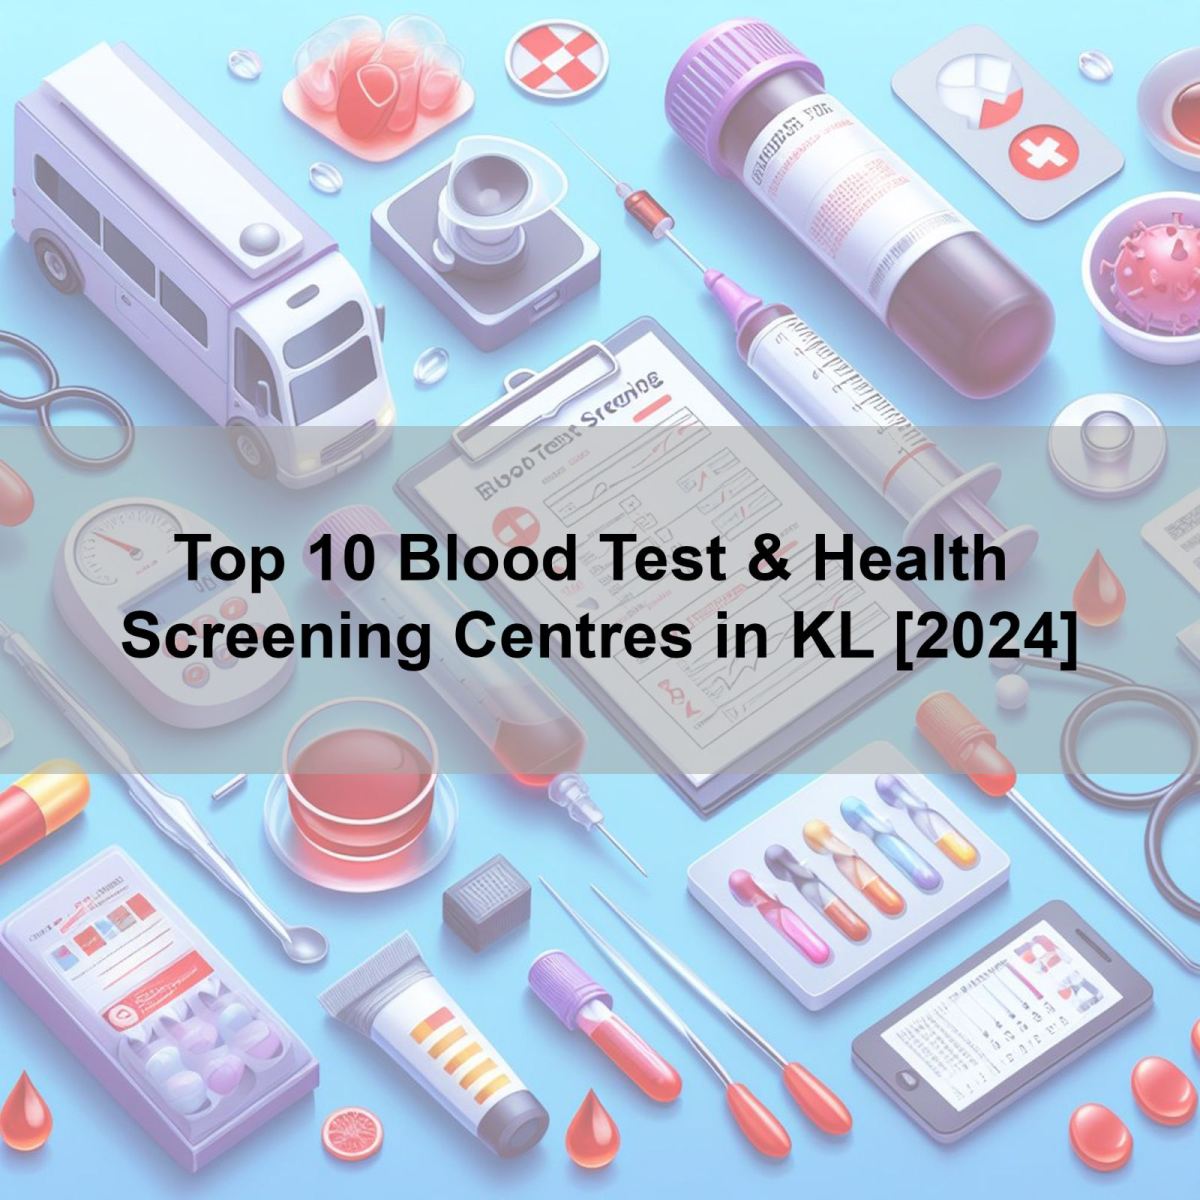 Top 10 Blood Test & Health Screening Centres in KL [2023]